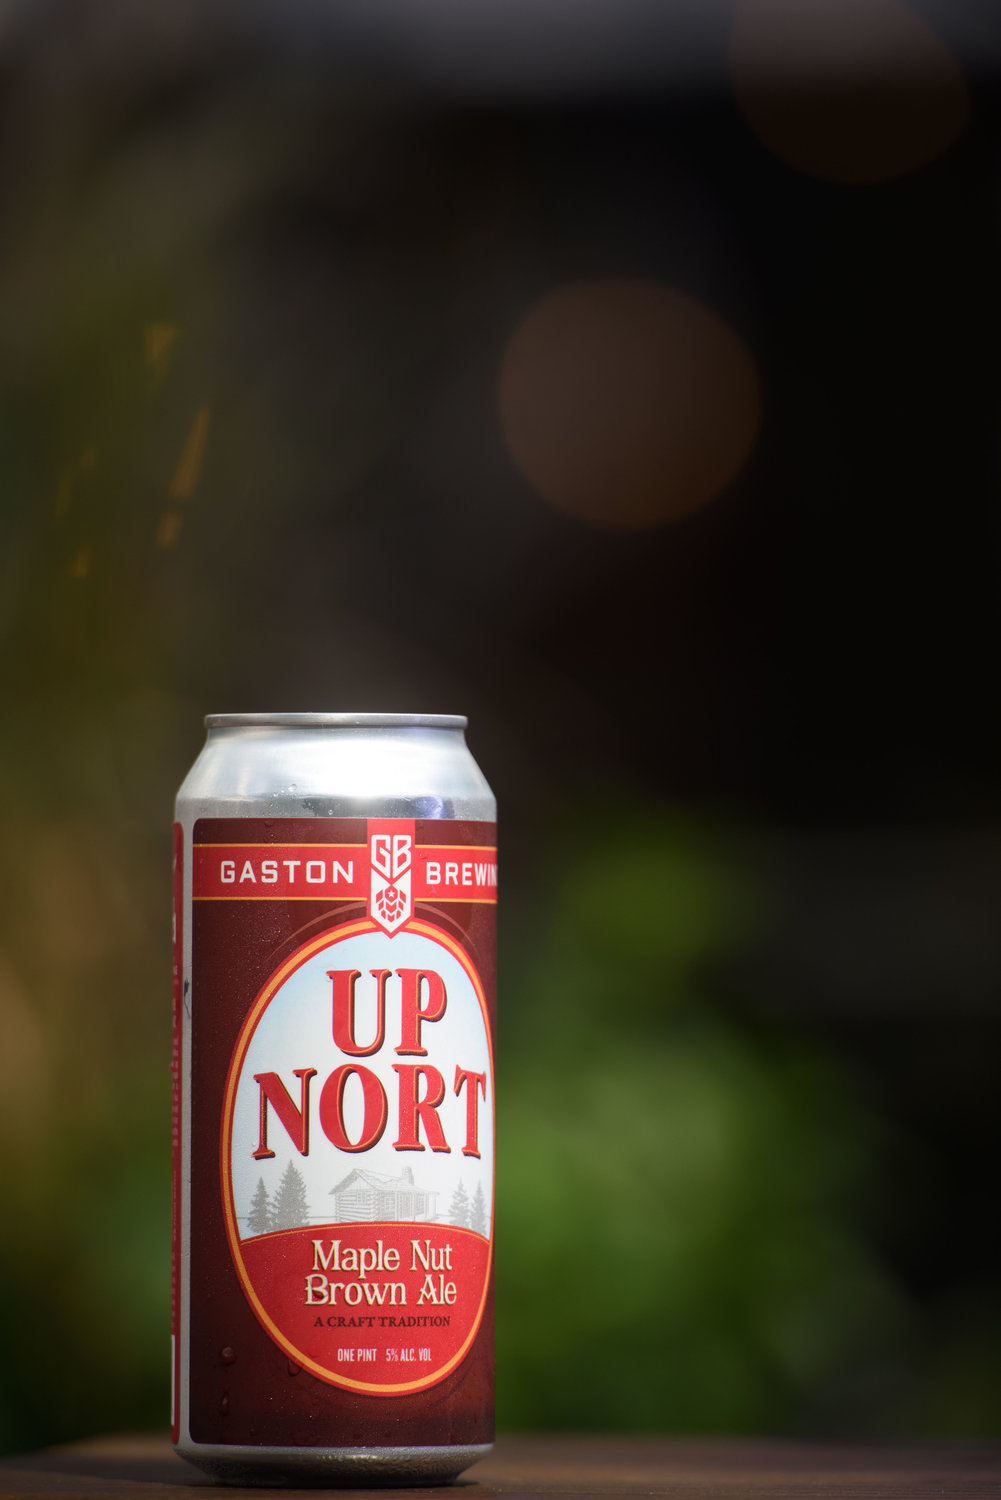 Gaston Brewing Co. has four new fall brews to celebrate at their restaurant location on Hay Street in Fayetteville. Photographed is the Up North Maple Nut Brown Ale.